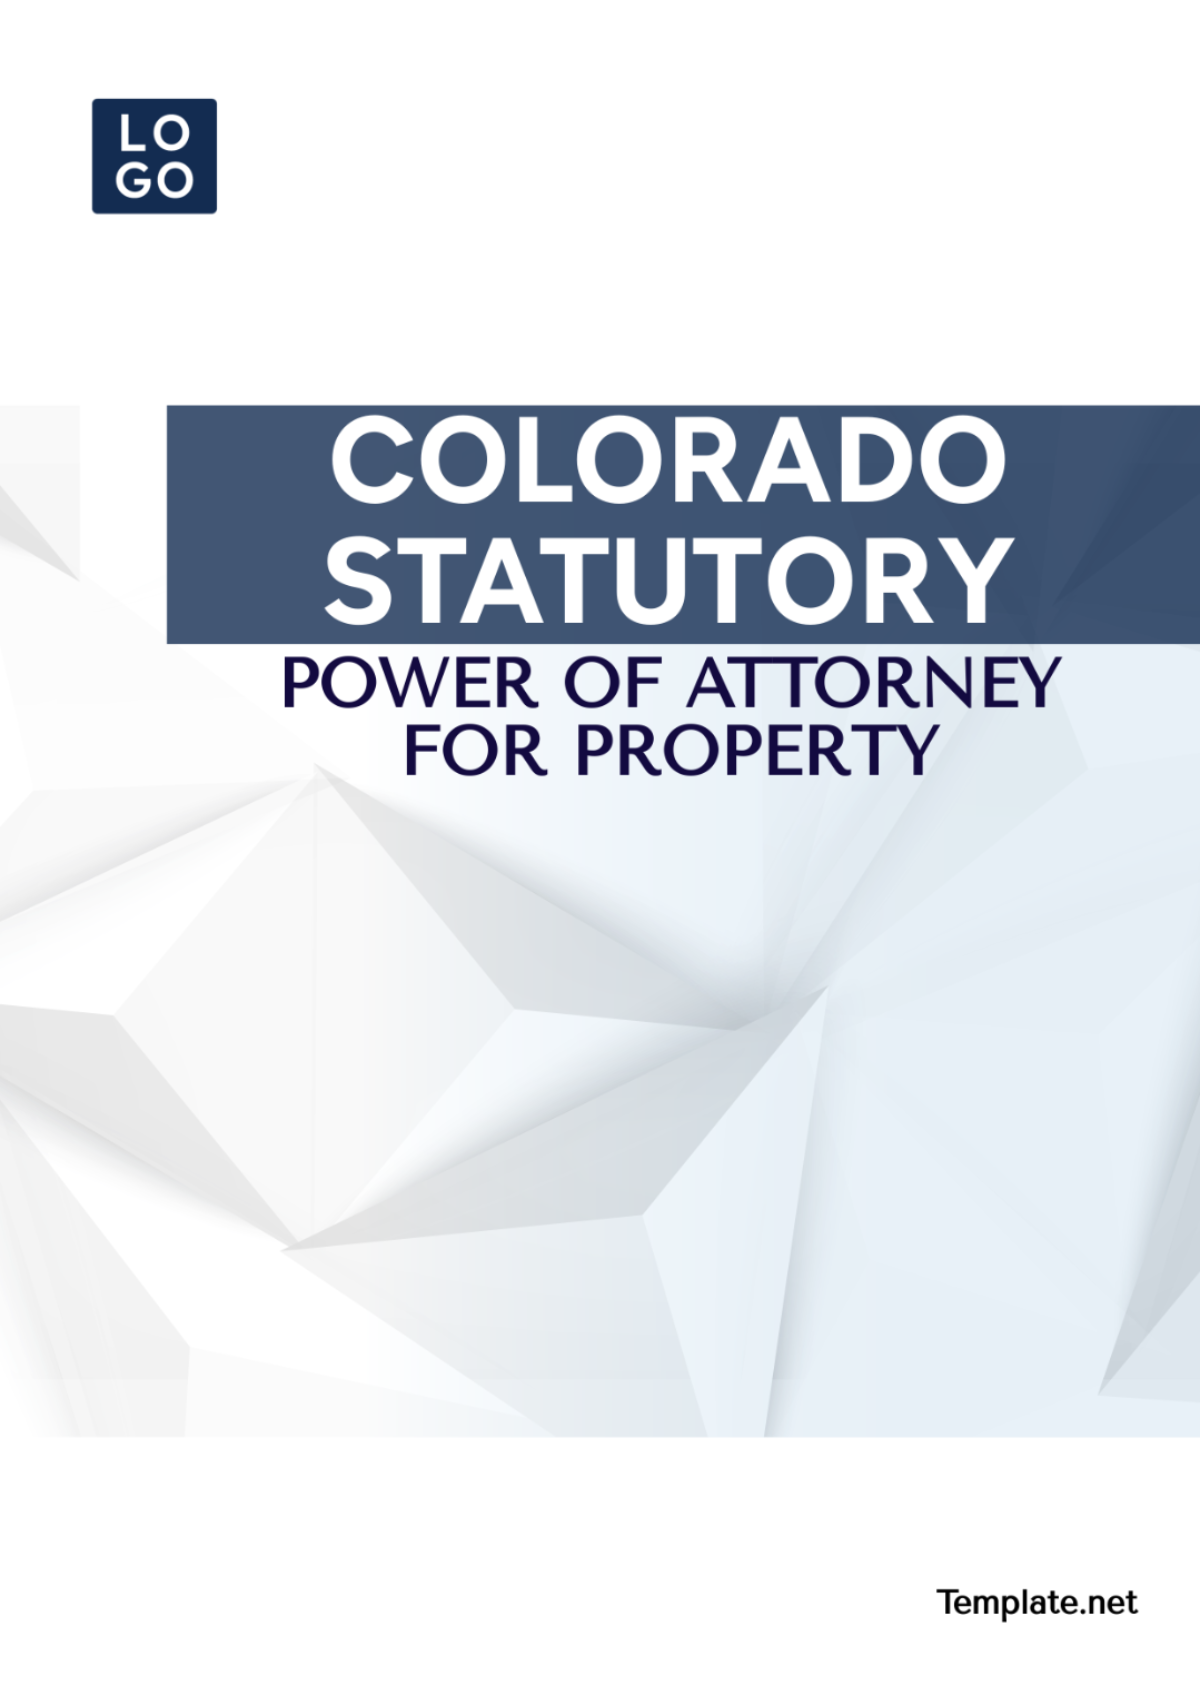 Colorado Statutory Power of Attorney For Property Template